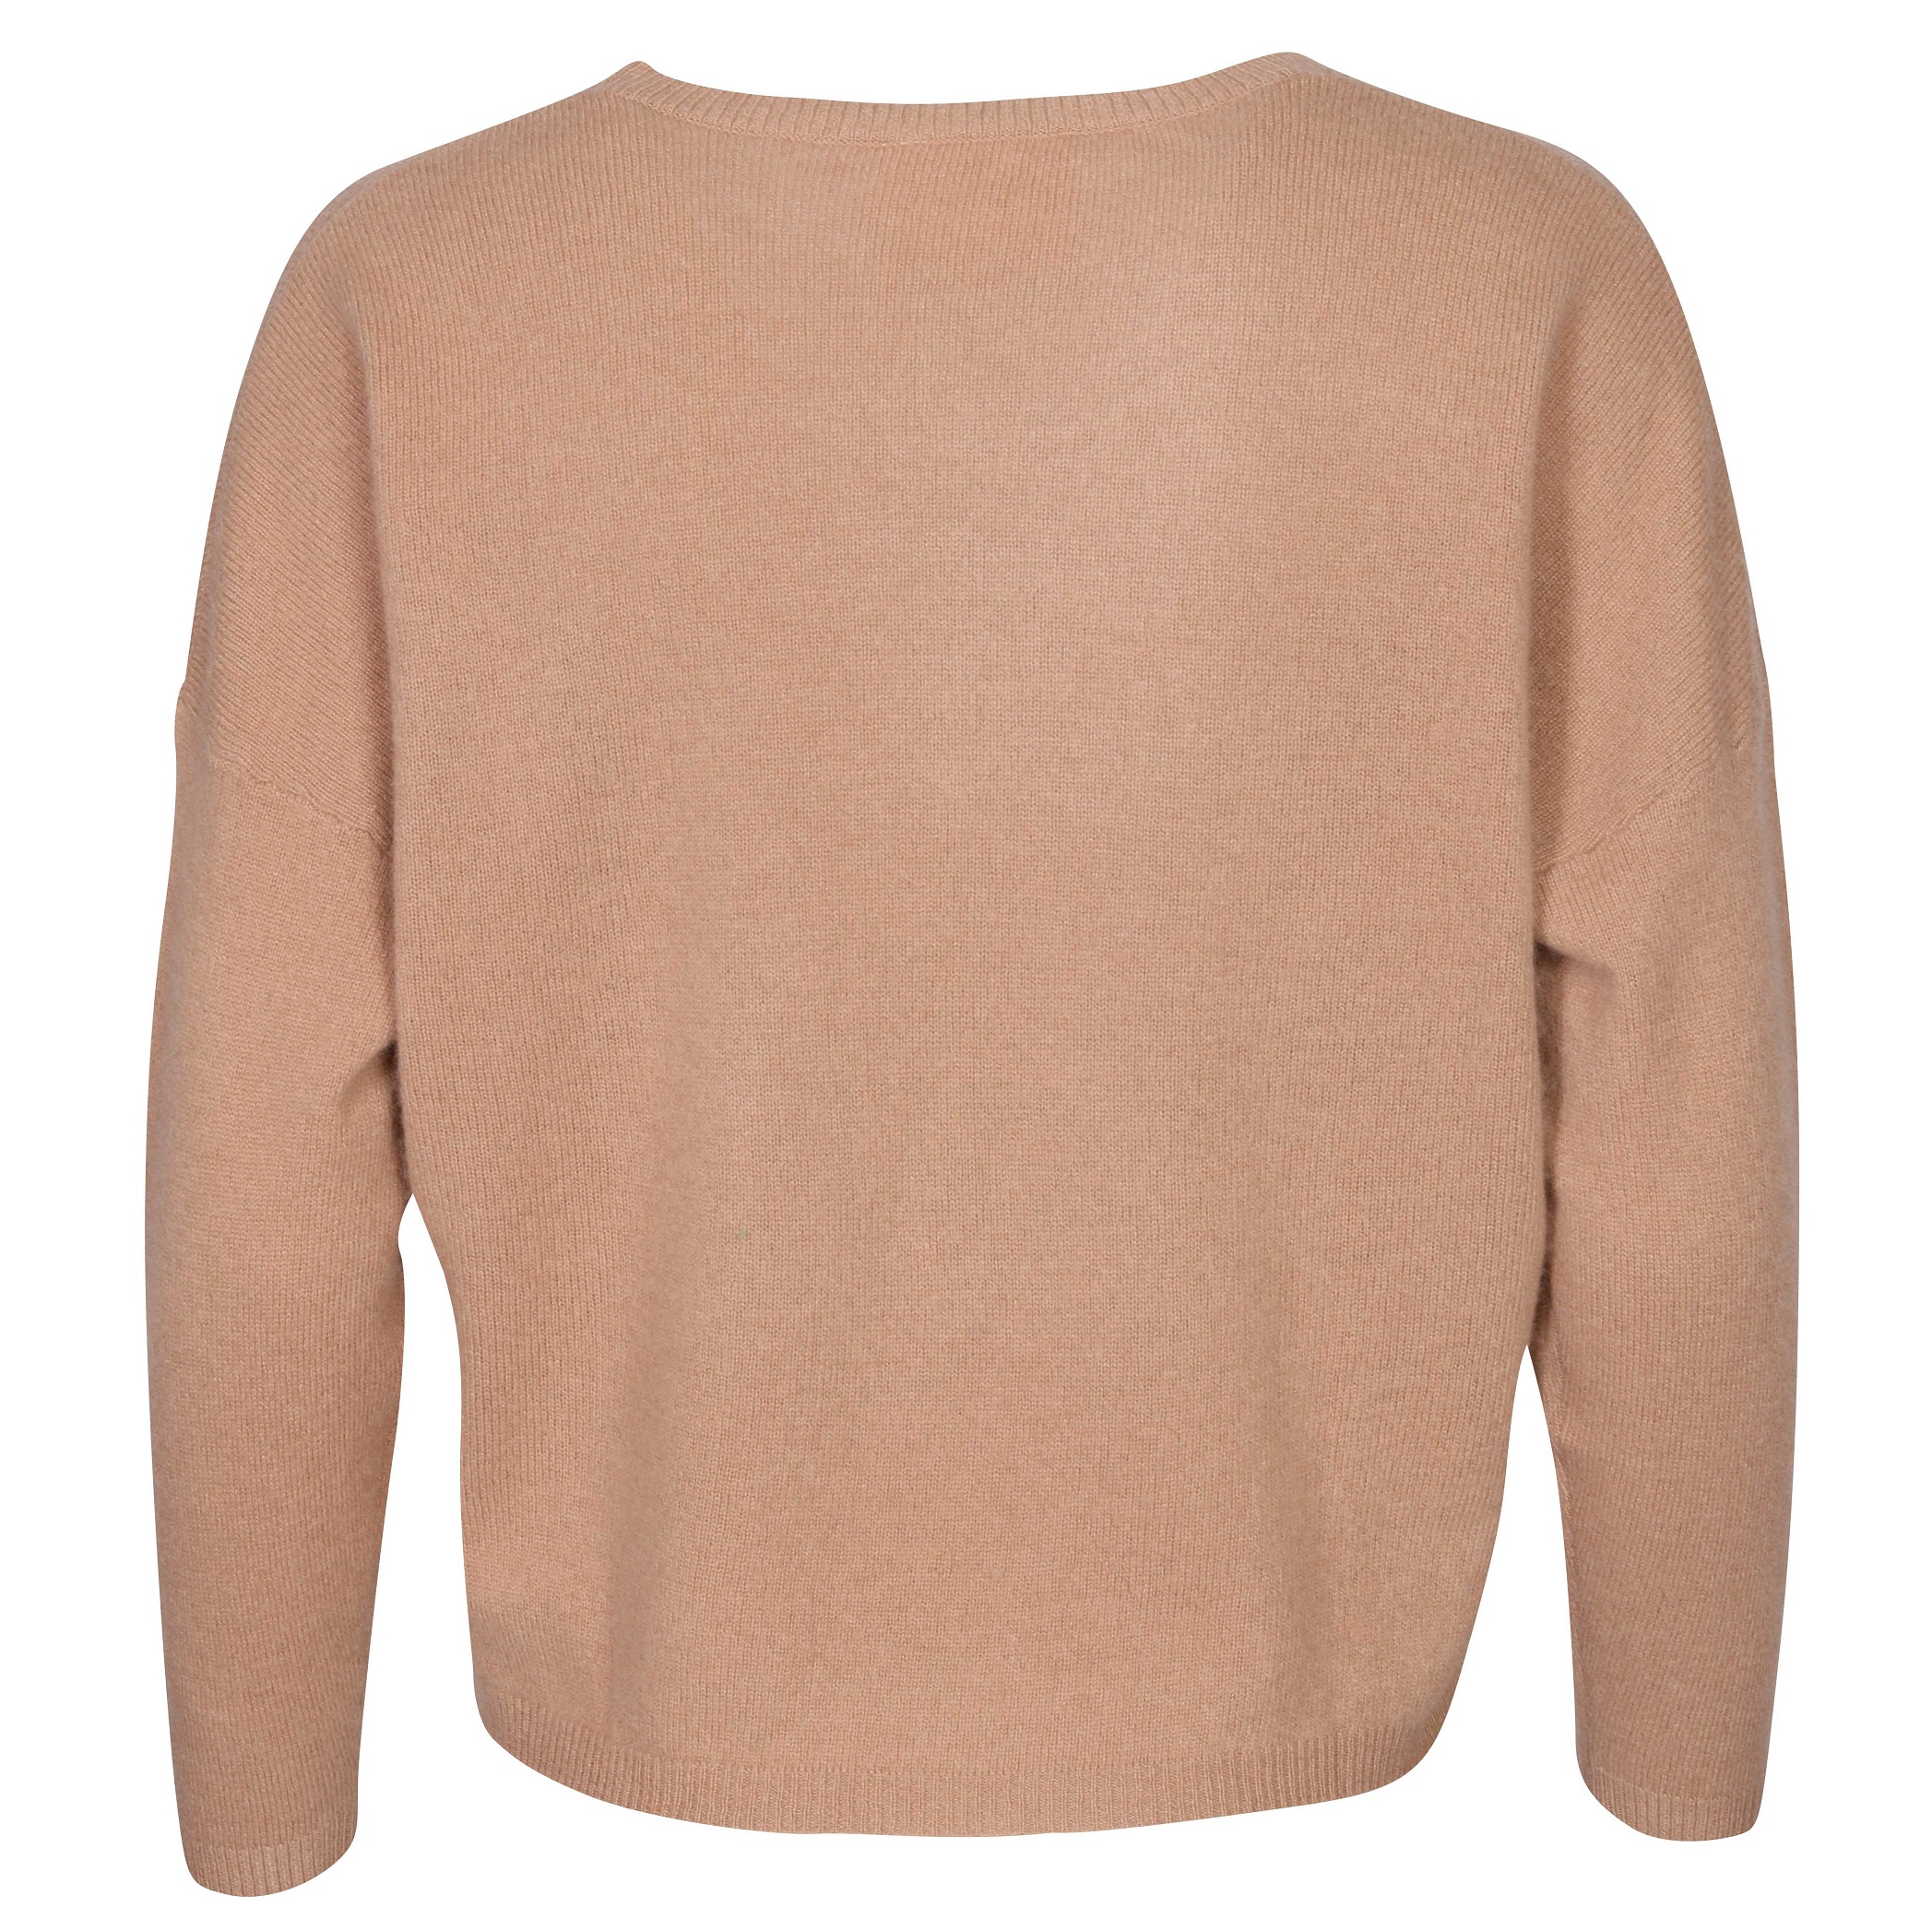 Absolut Cashmere Kaira Cashmere Pullover in Camel L